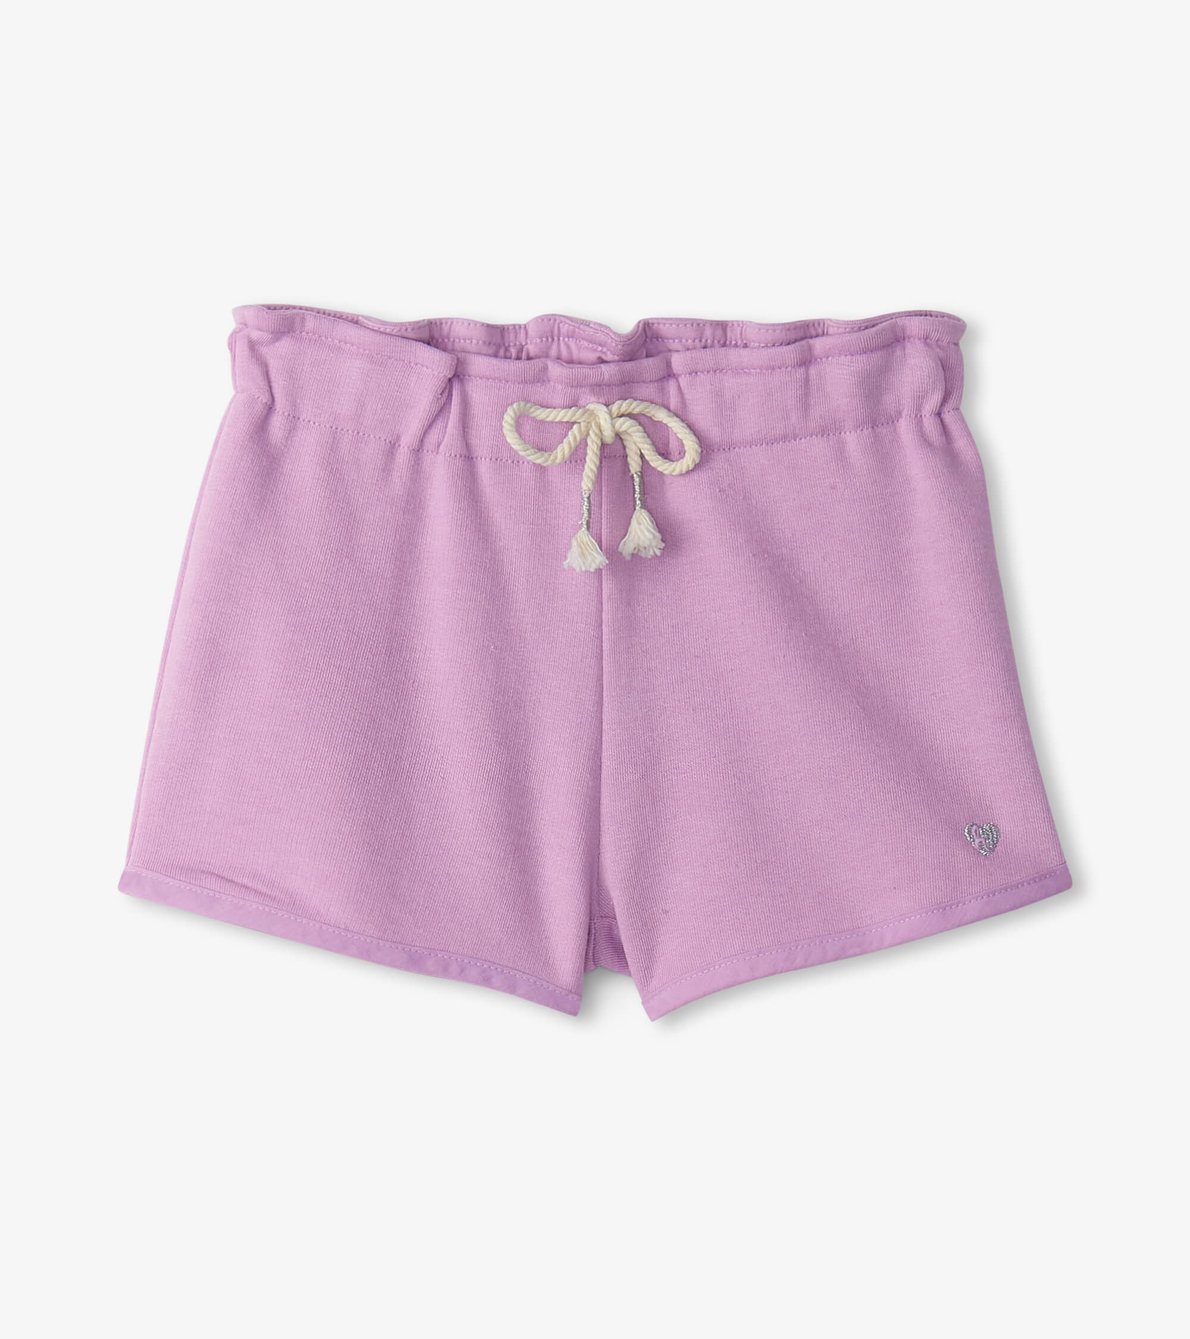 View larger image of Girls Lilac Paper Bag Shorts